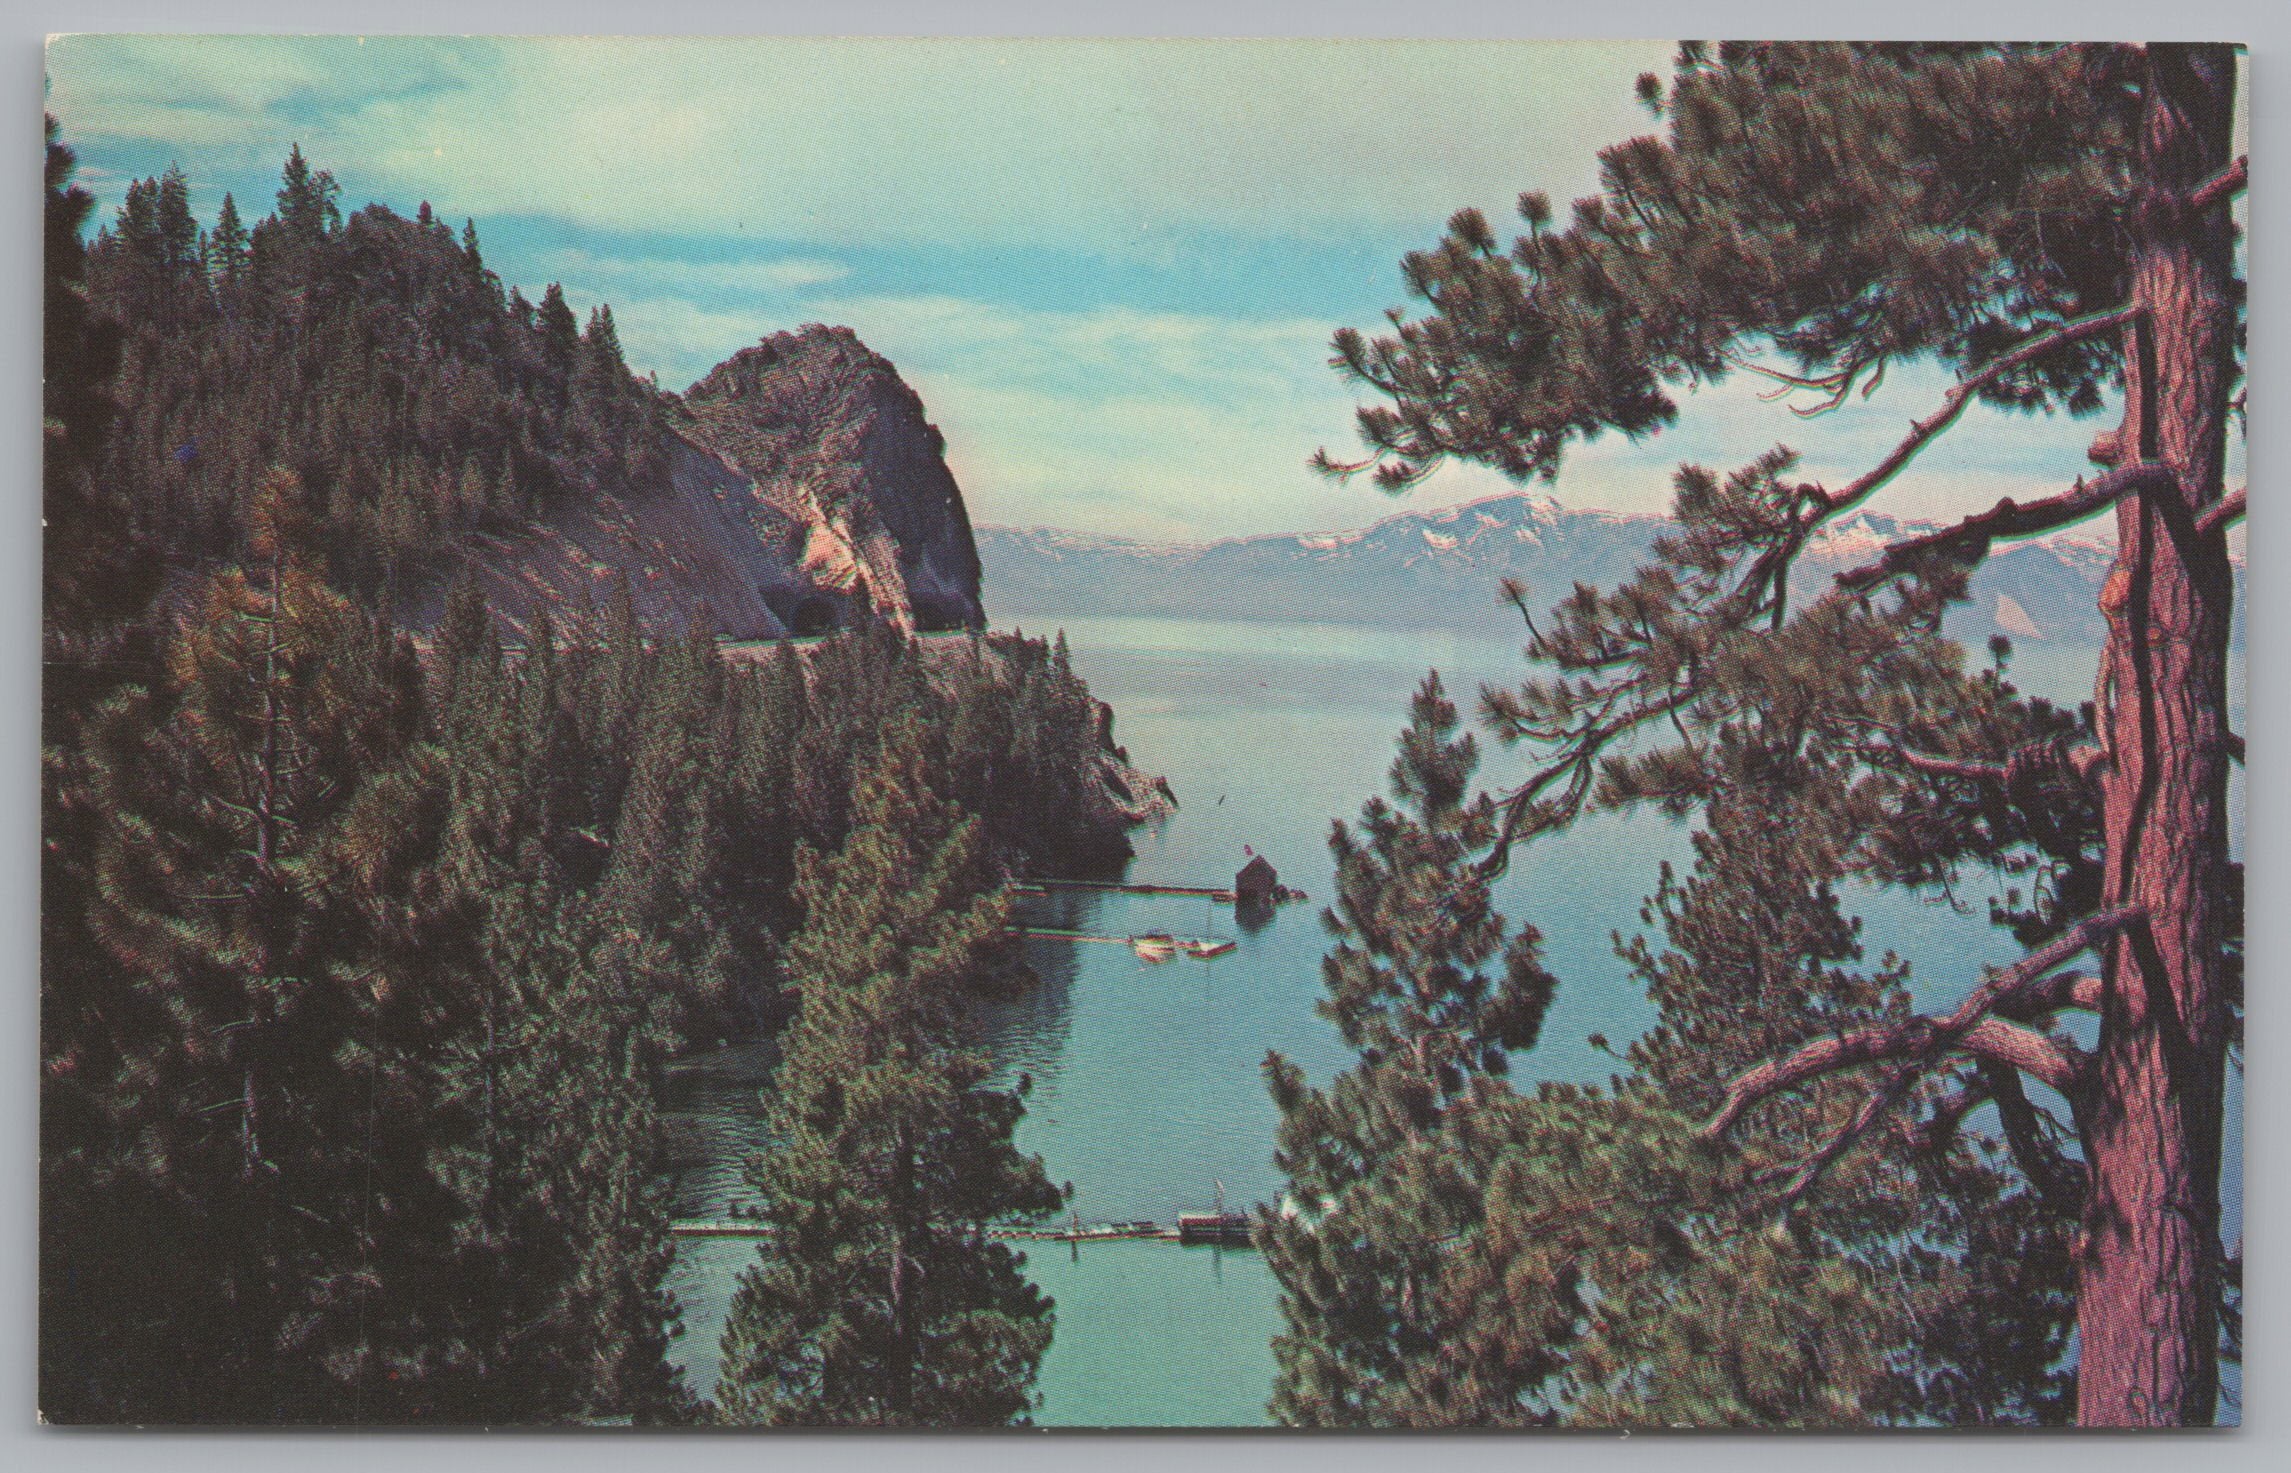 Cave Rock, The Cross Of Mount Tallac, Mile High Lake Tahoe, Vintage Post Card